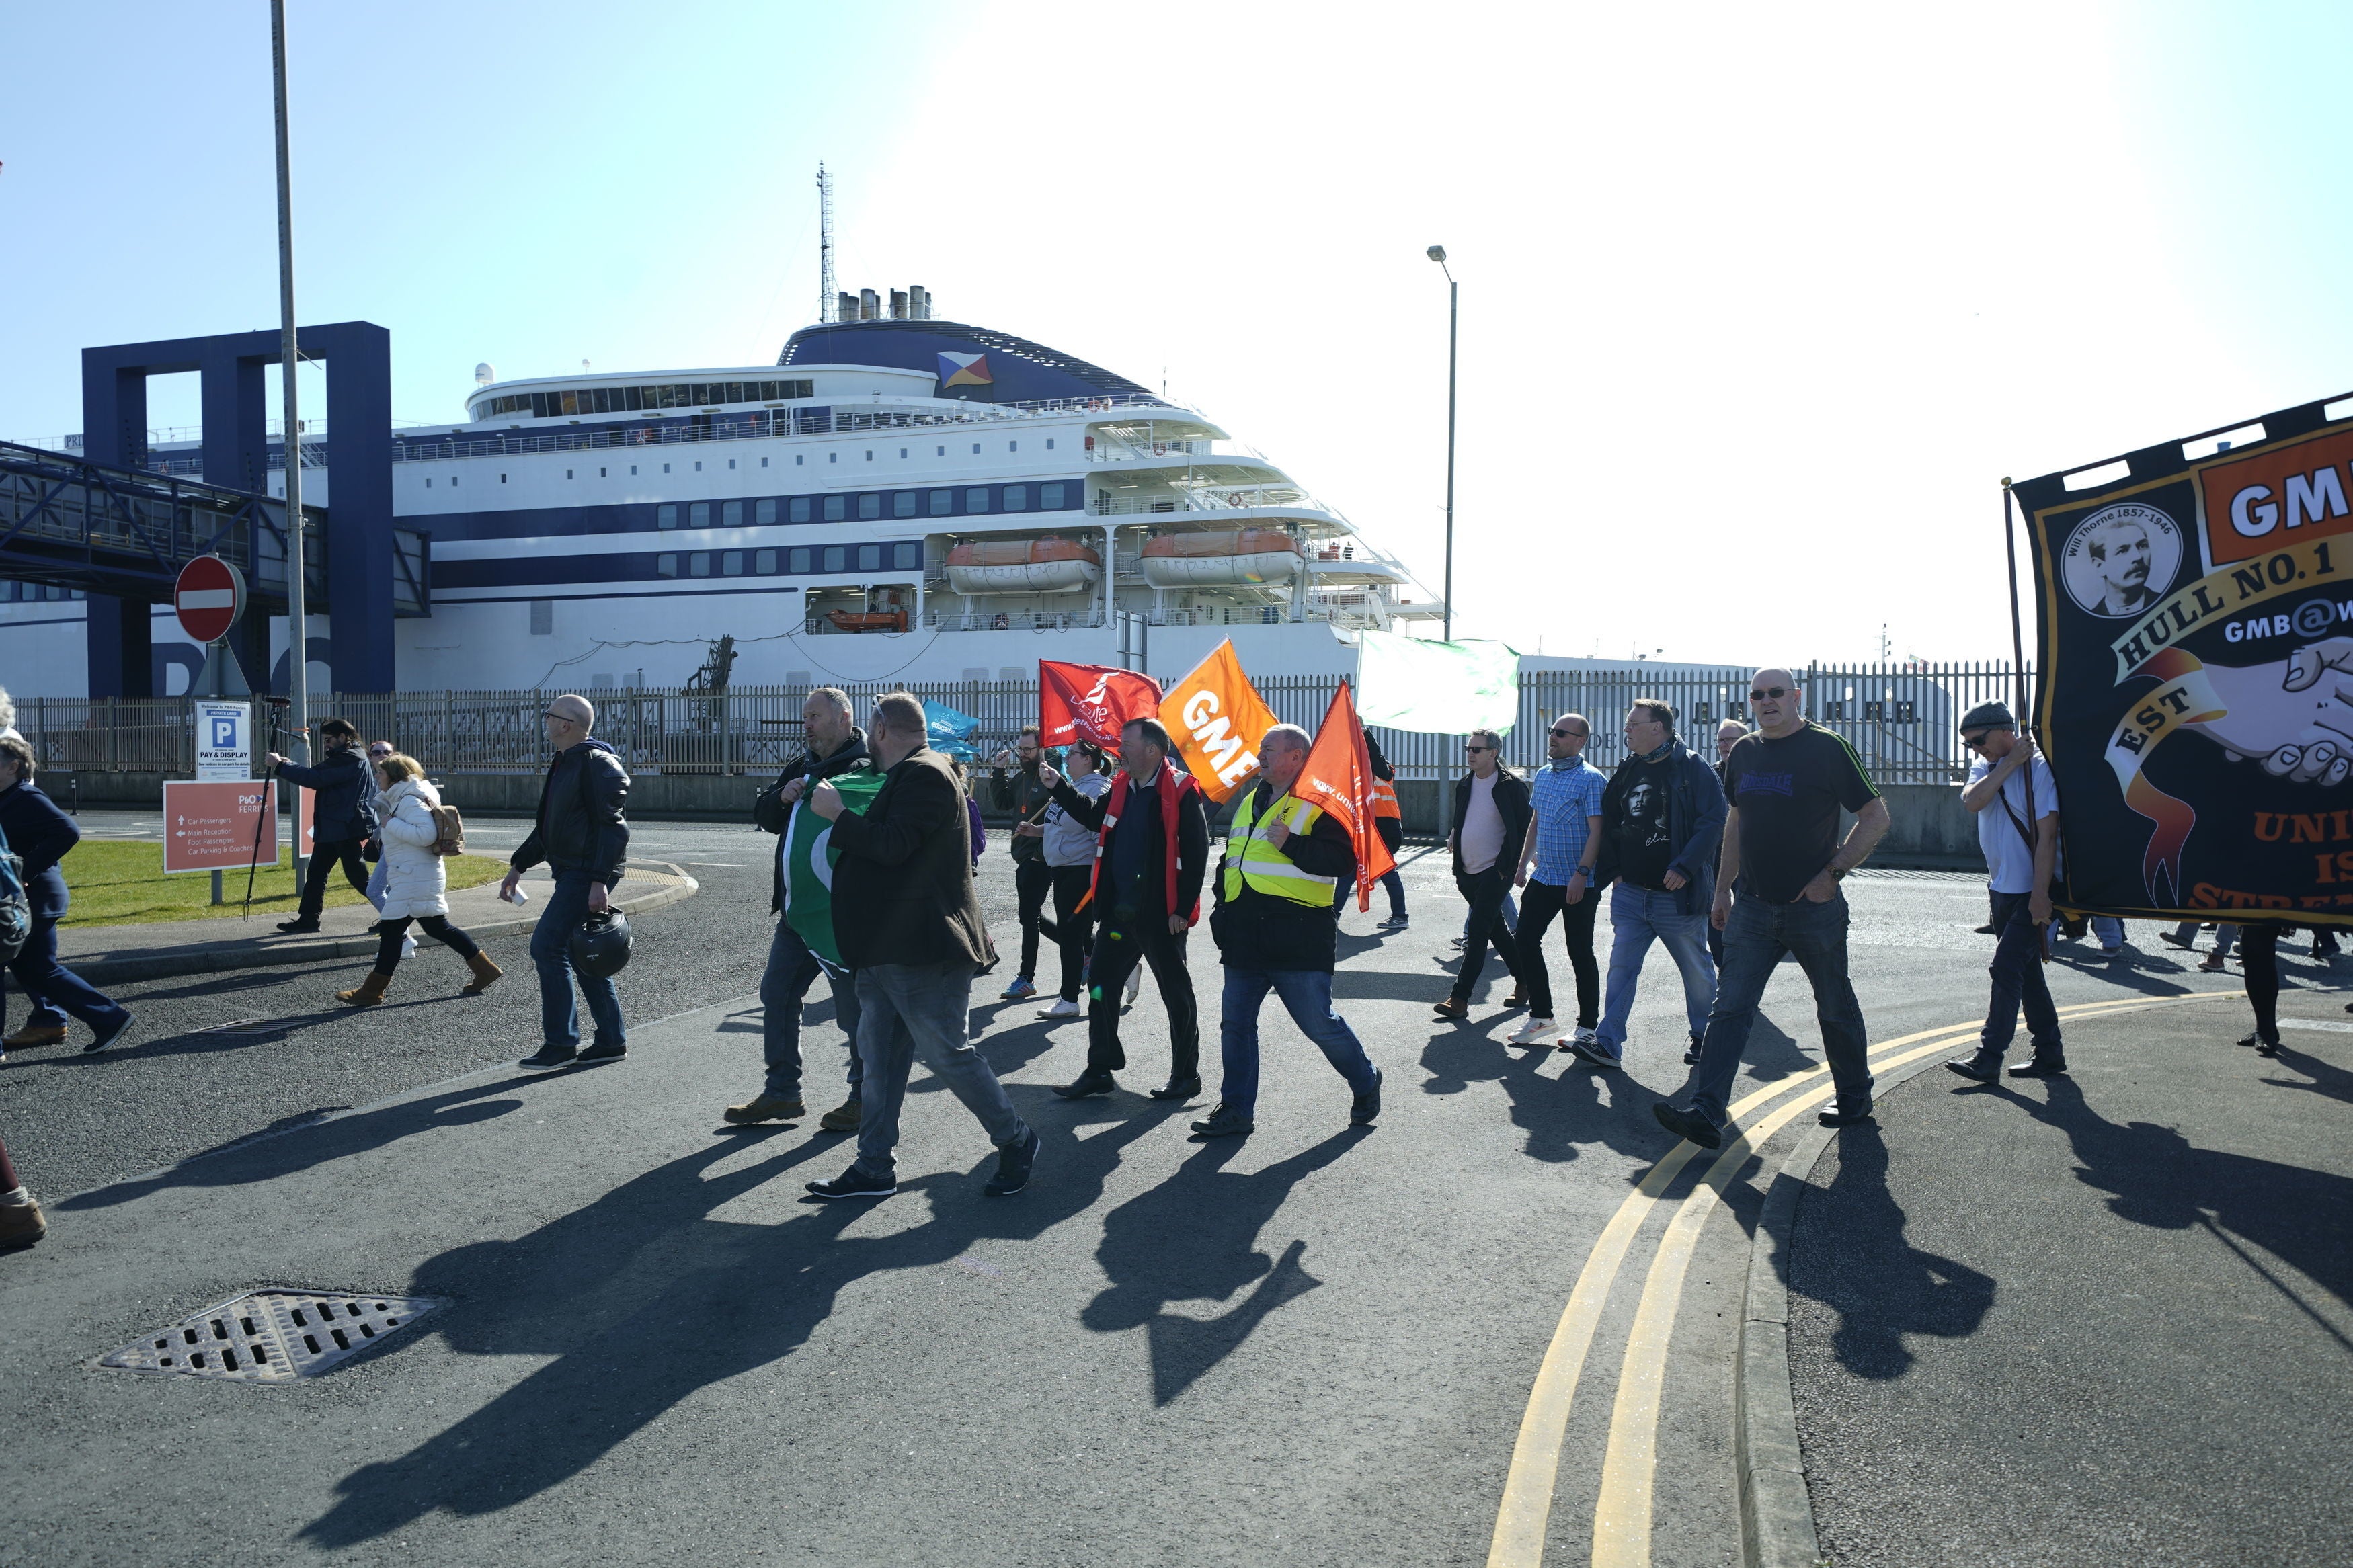 Protesters marched into the Port of Hull on Friday, the day after P&O Ferries suspended sailings